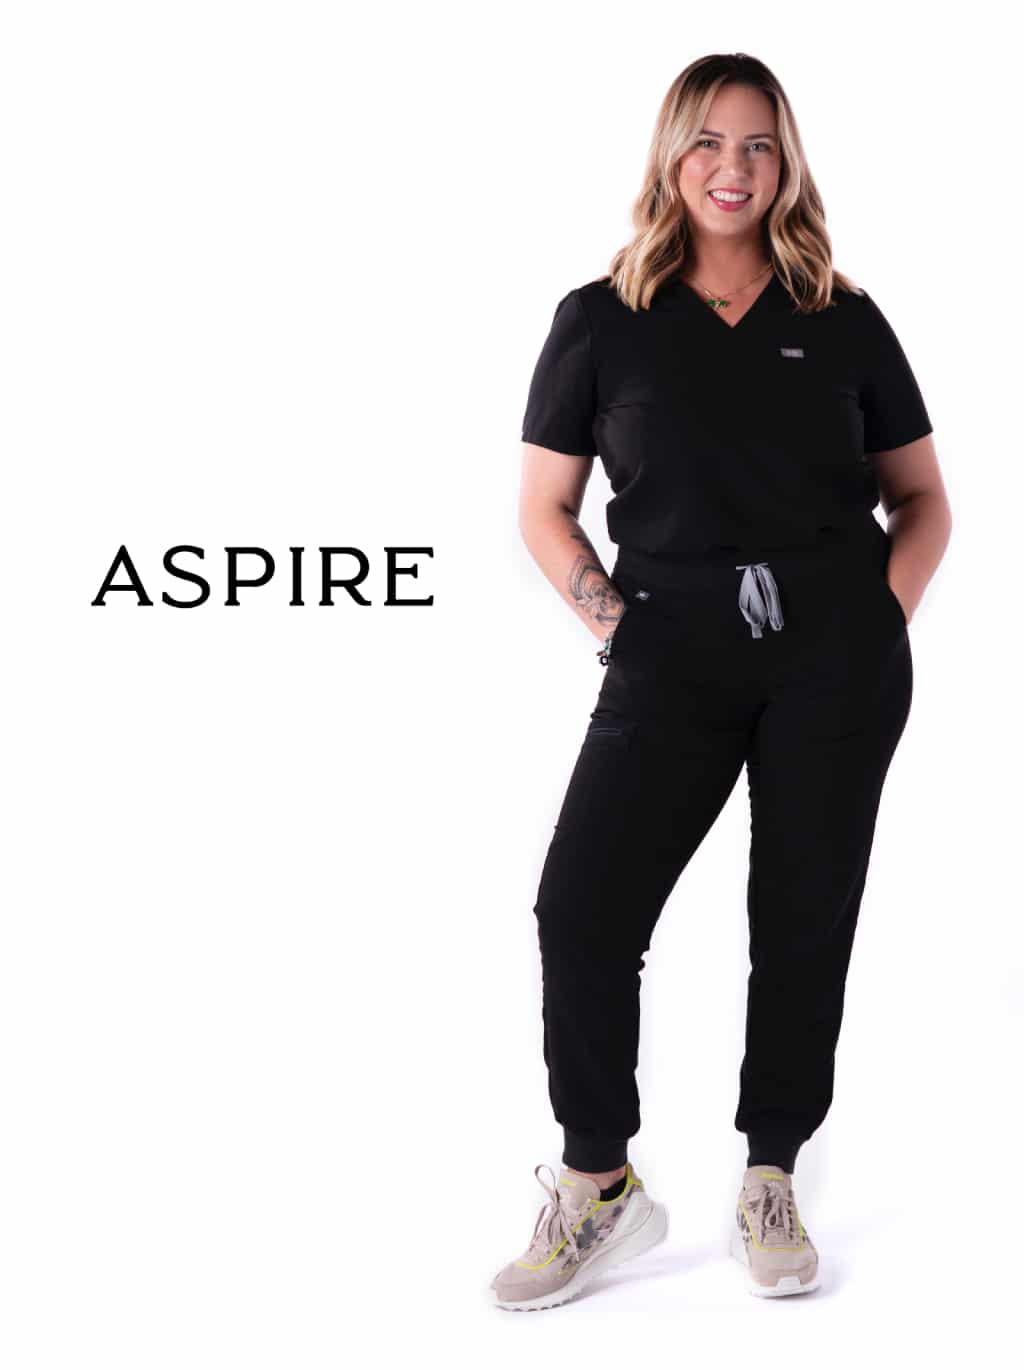 Micah | Our Team | Aspire Aesthetics and Wellness